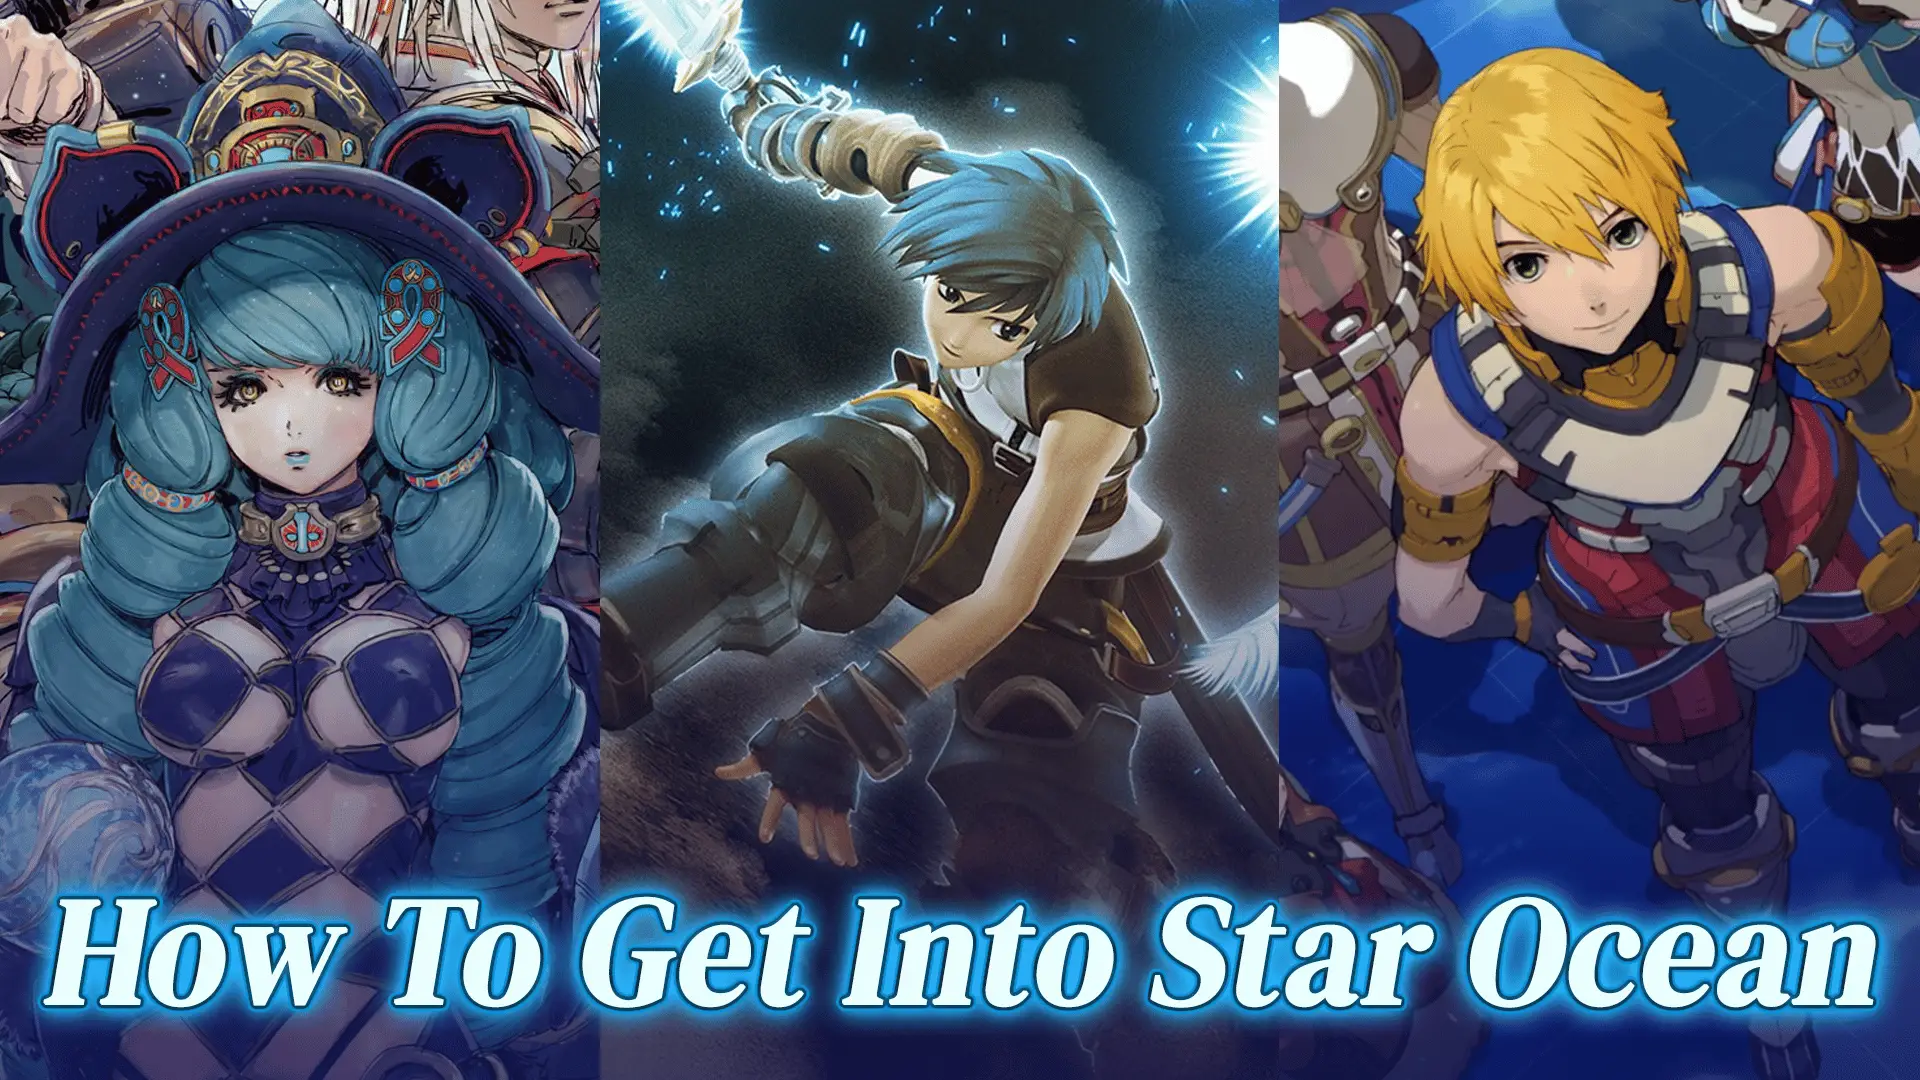 How To Get Into Star Ocean; The Beginner’s Guide